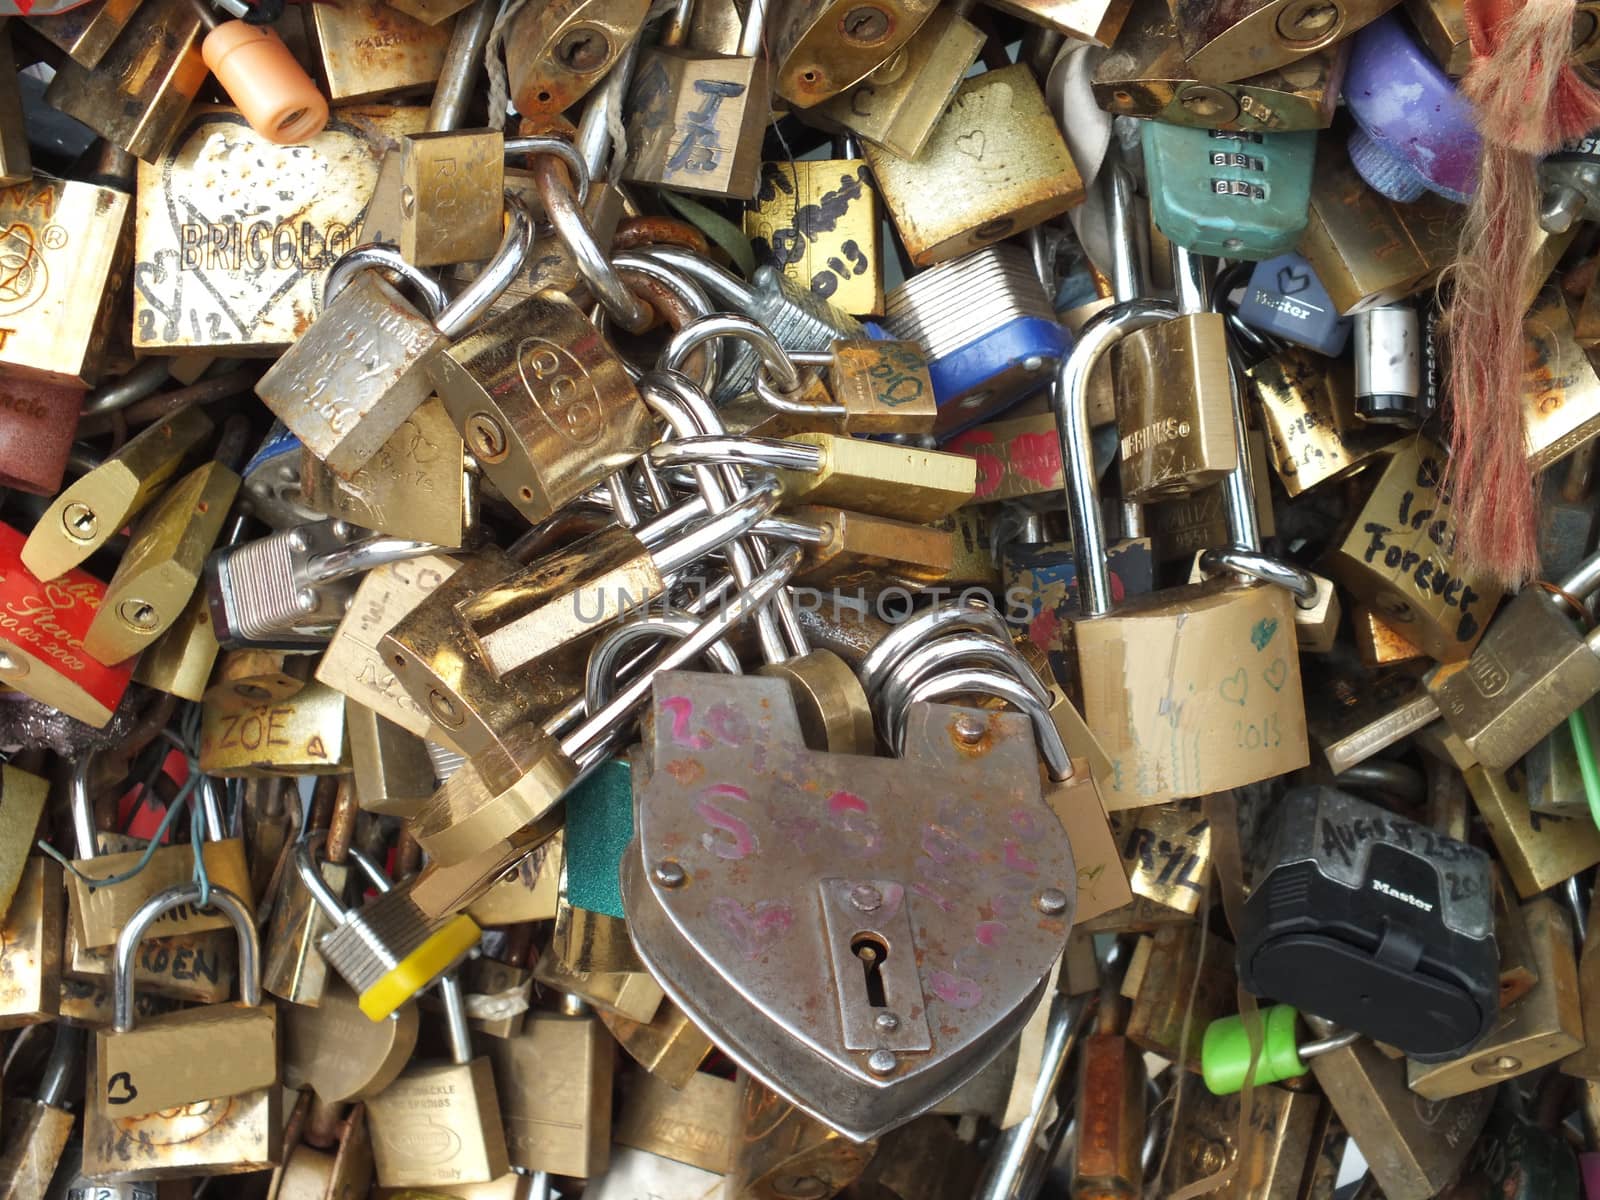 A love lock is a padlock which sweethearts lock to a bridge to symbolize their love and usually their' names or initials are inscribed on it. The key is then thrown away to symbolise unbreakable love.
